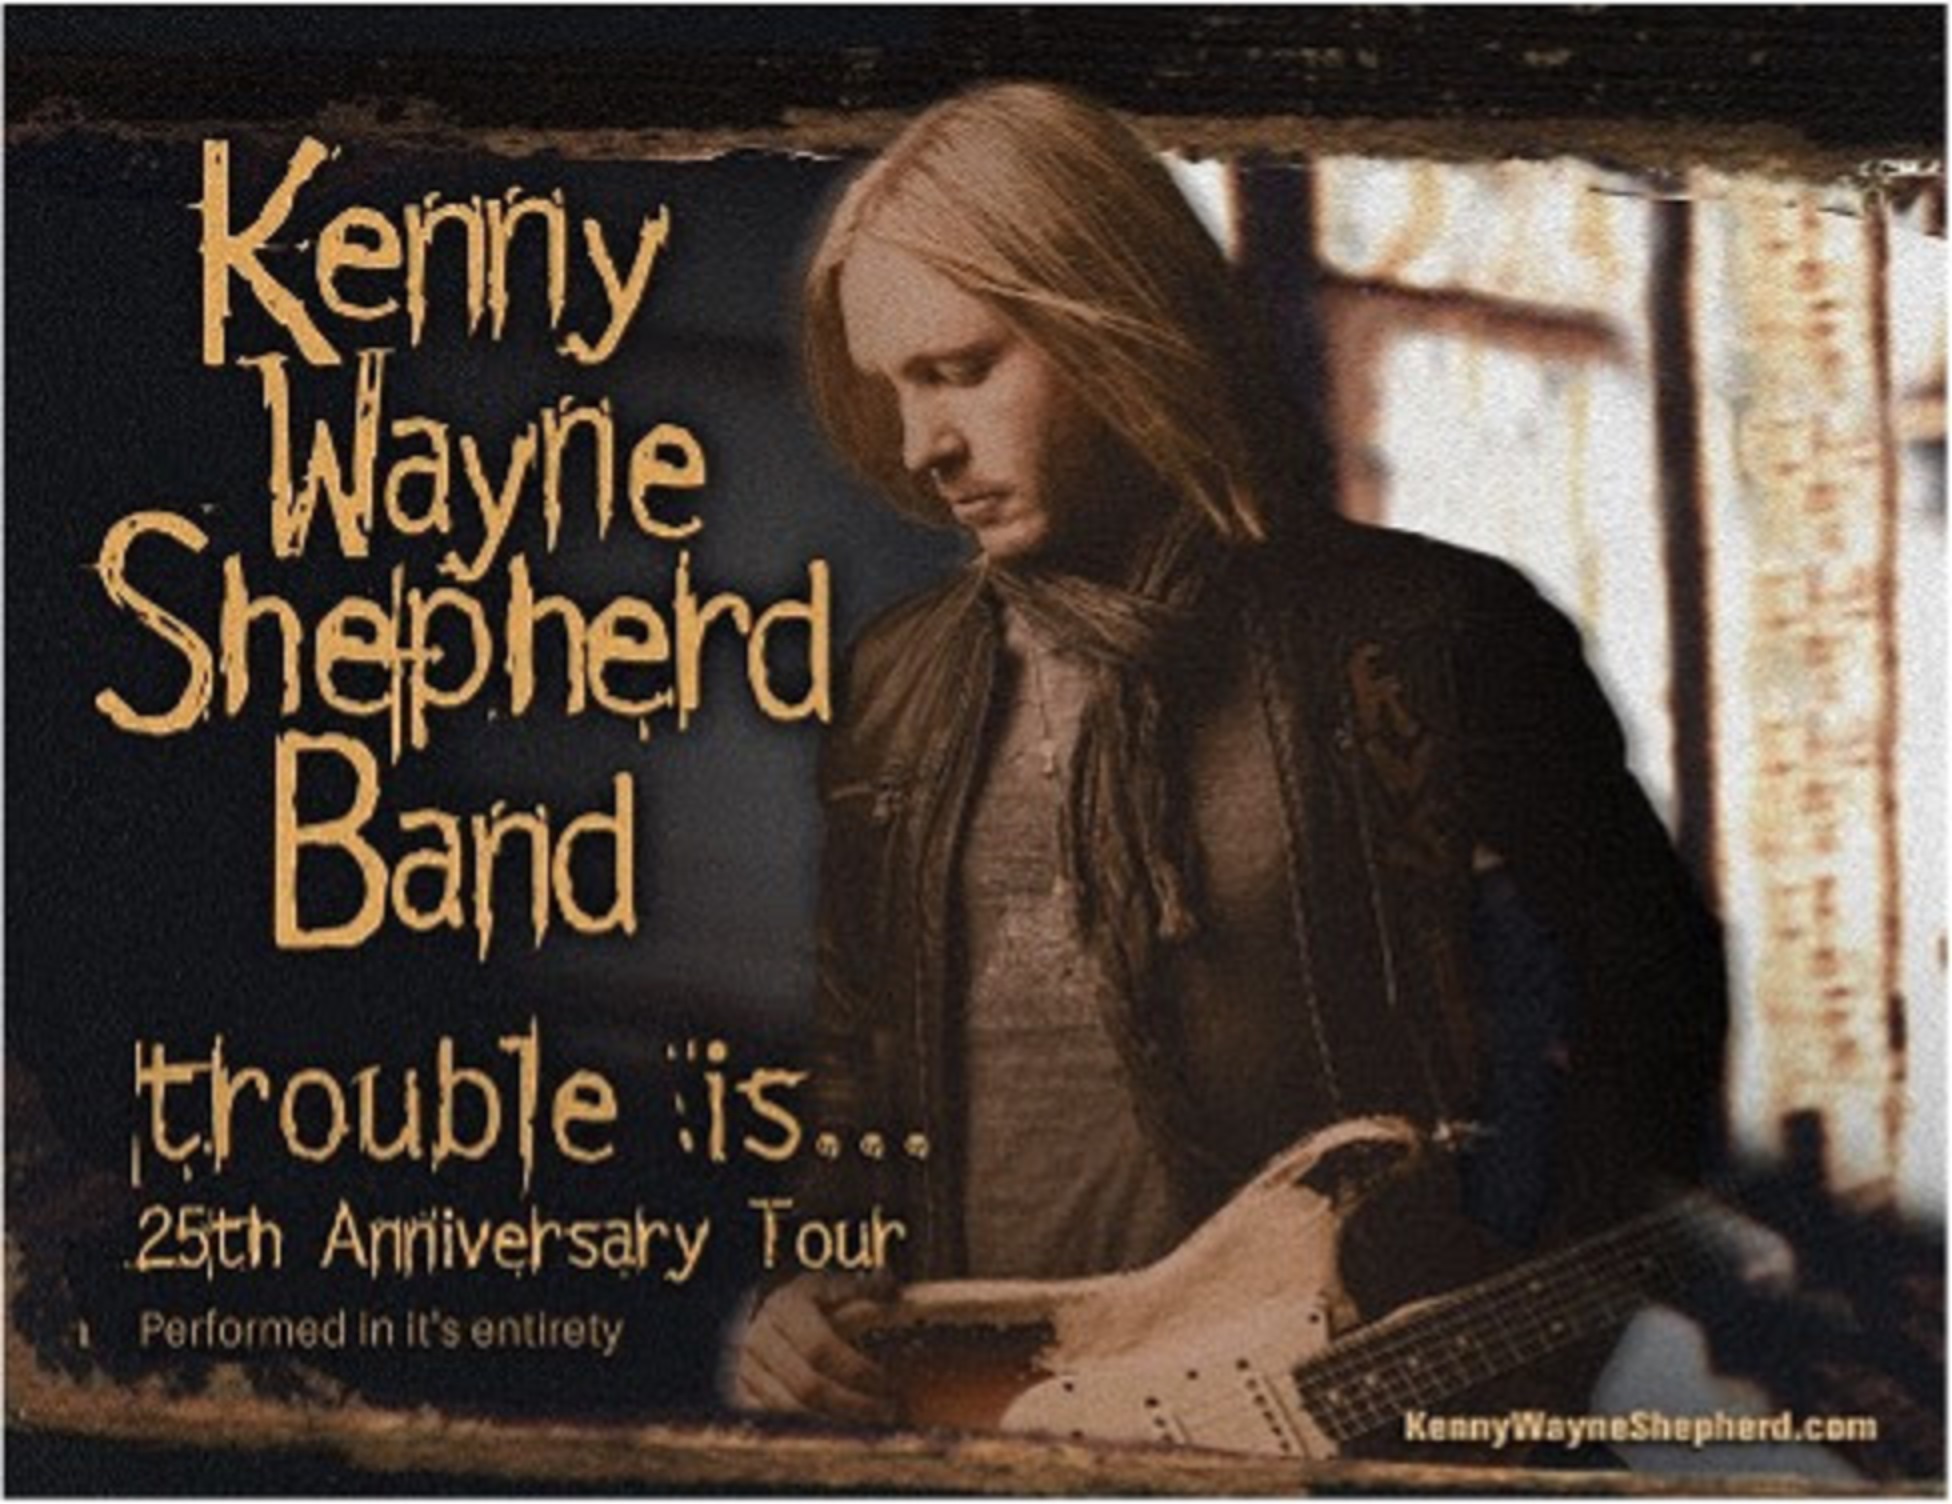 Kenny Wayne Shepherd Band Announces US Tour Celebrating the 25th Anniversary of 'Trouble Is…'